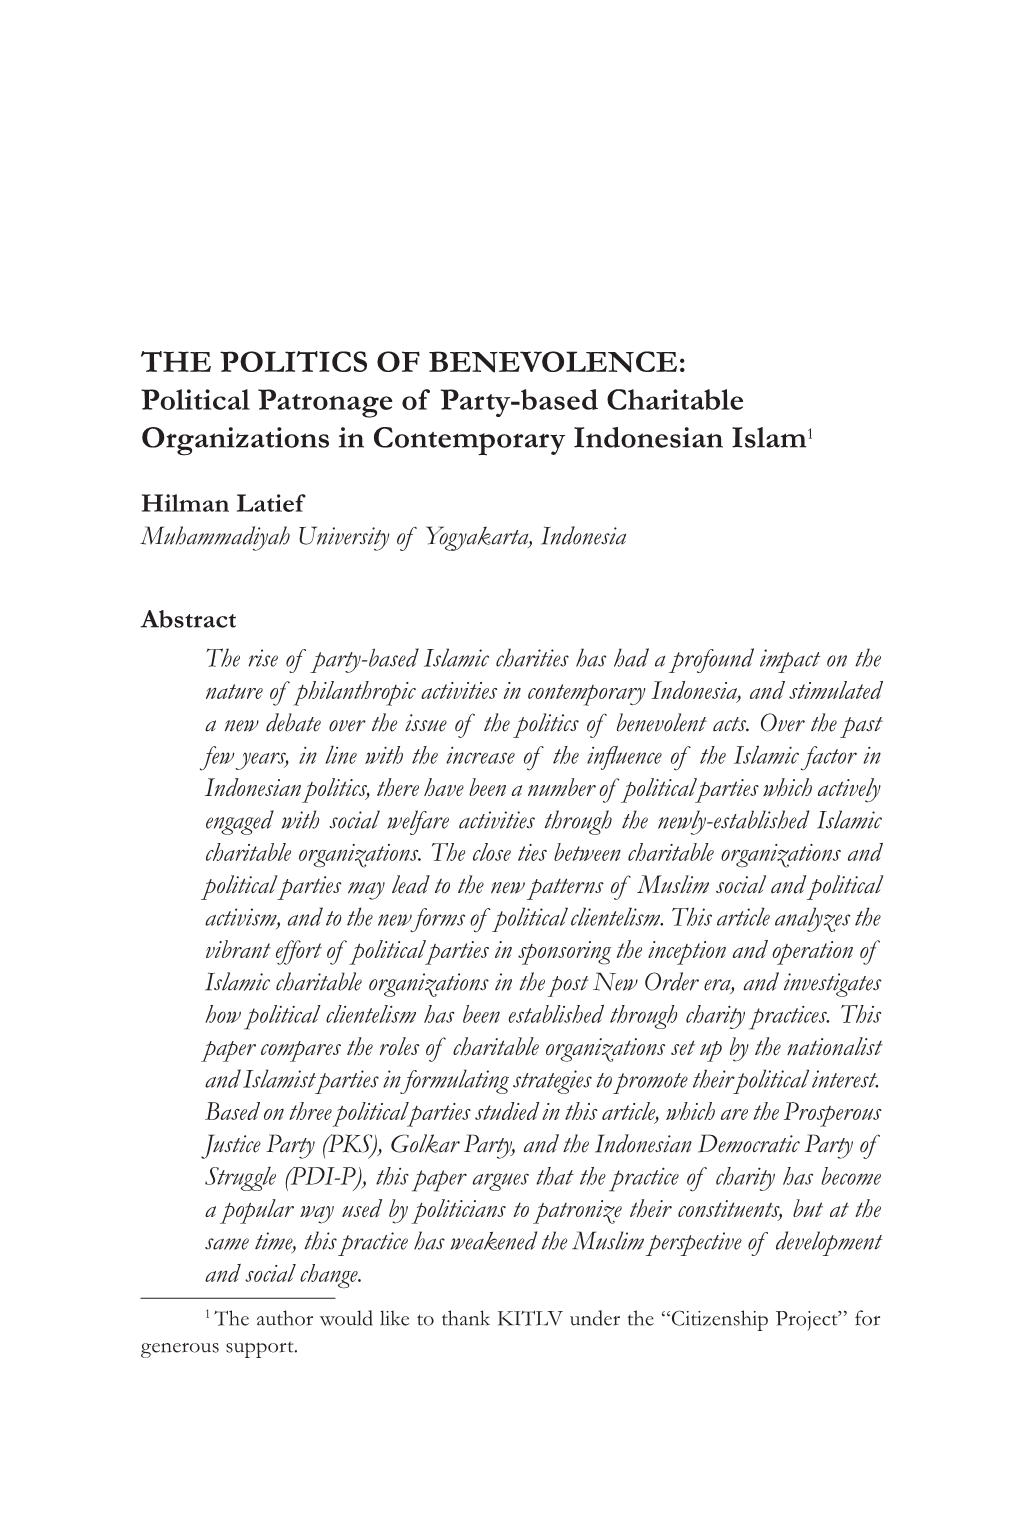 Political Patronage of Party-Based Charitable Organizations in Contemporary Indonesian Islam1